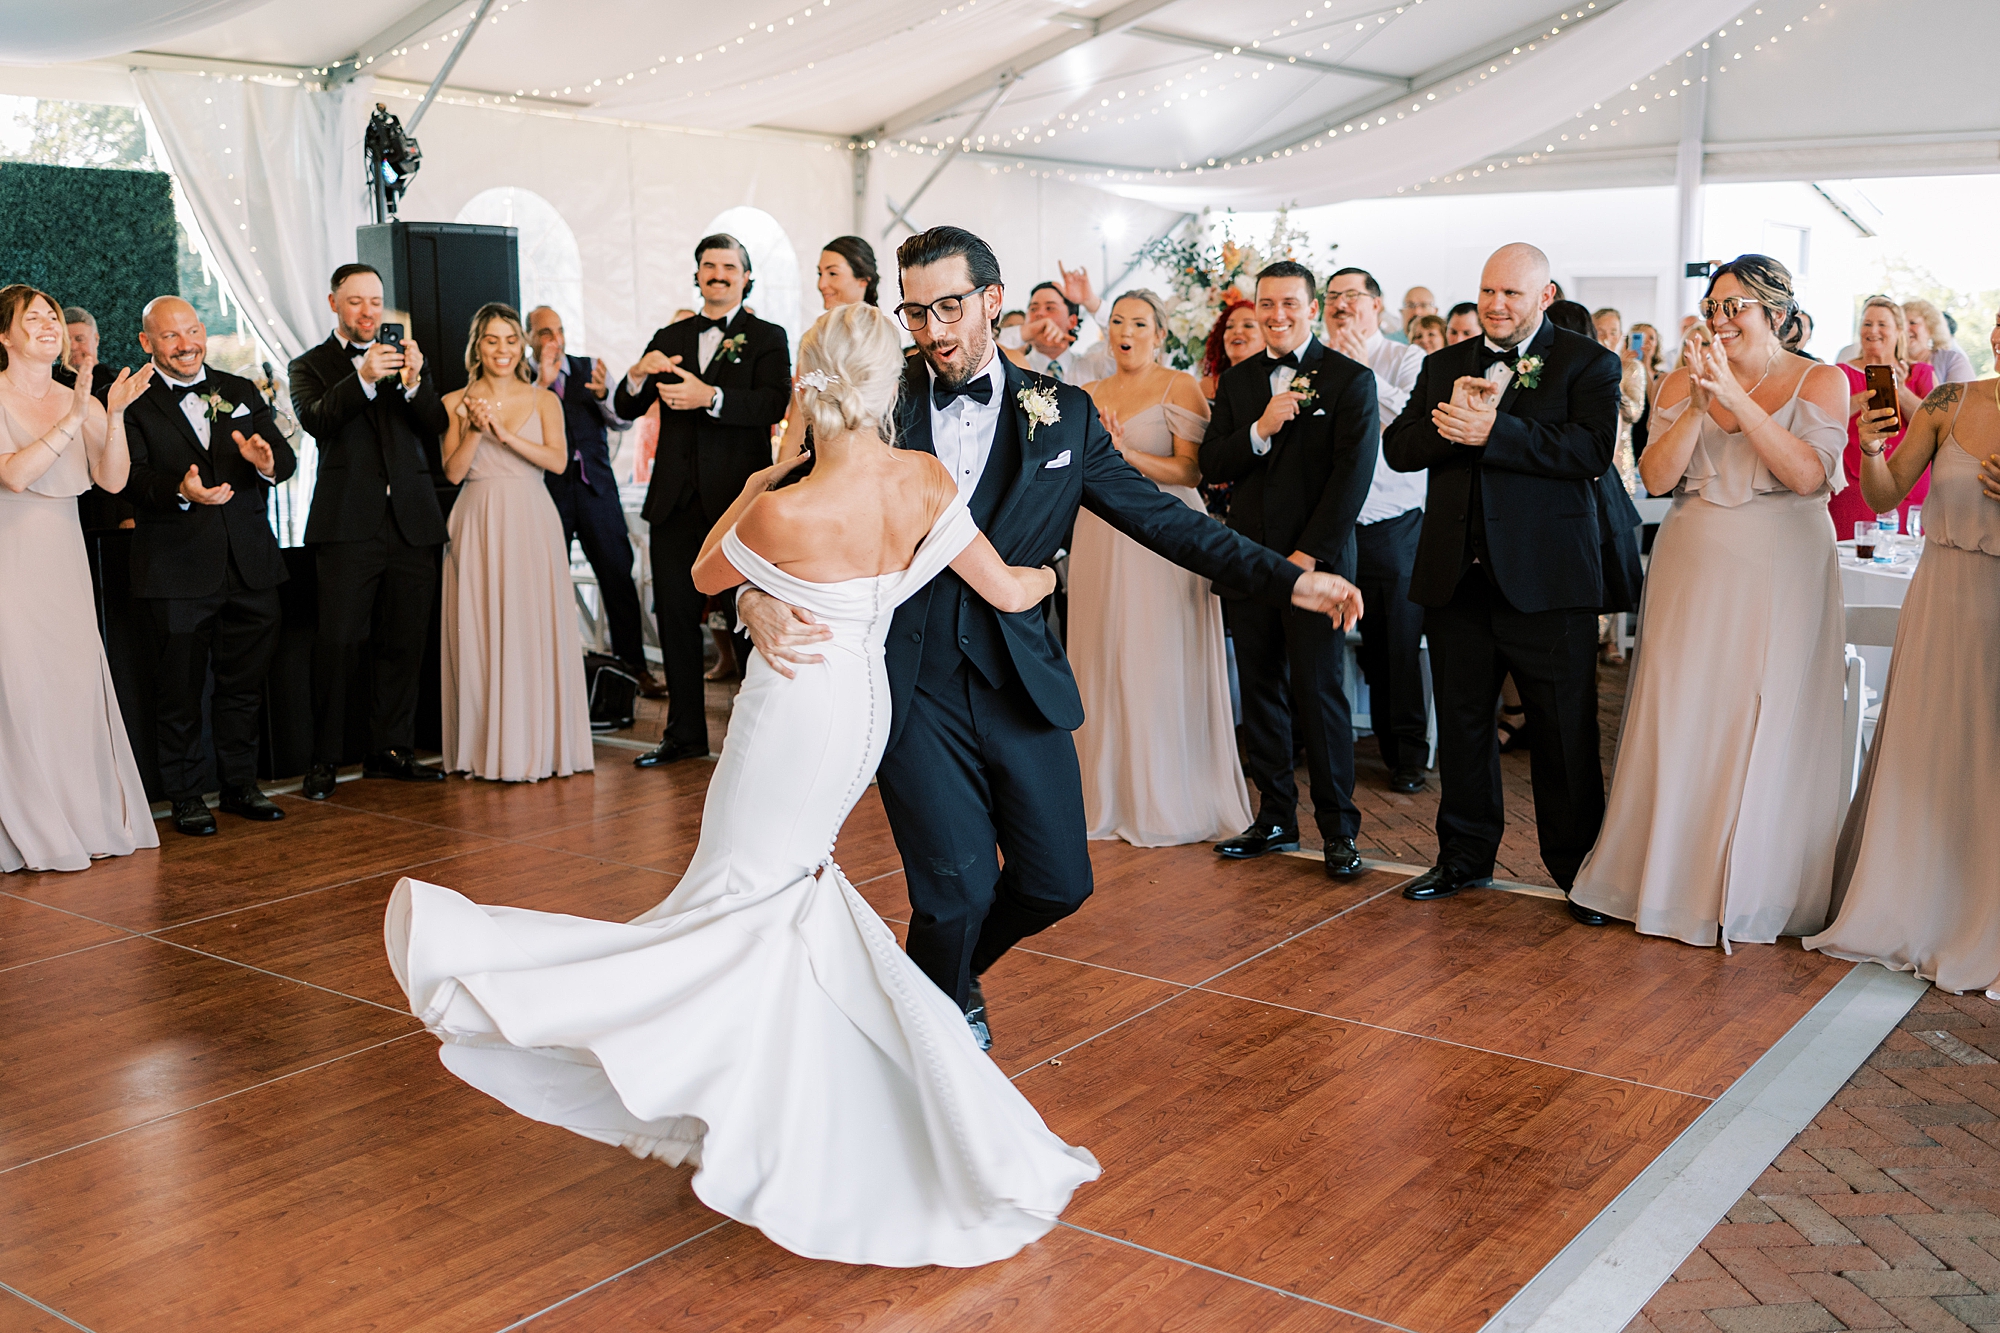 bride and groom dance on dance floor during wedding reception at Lauxmont Farms